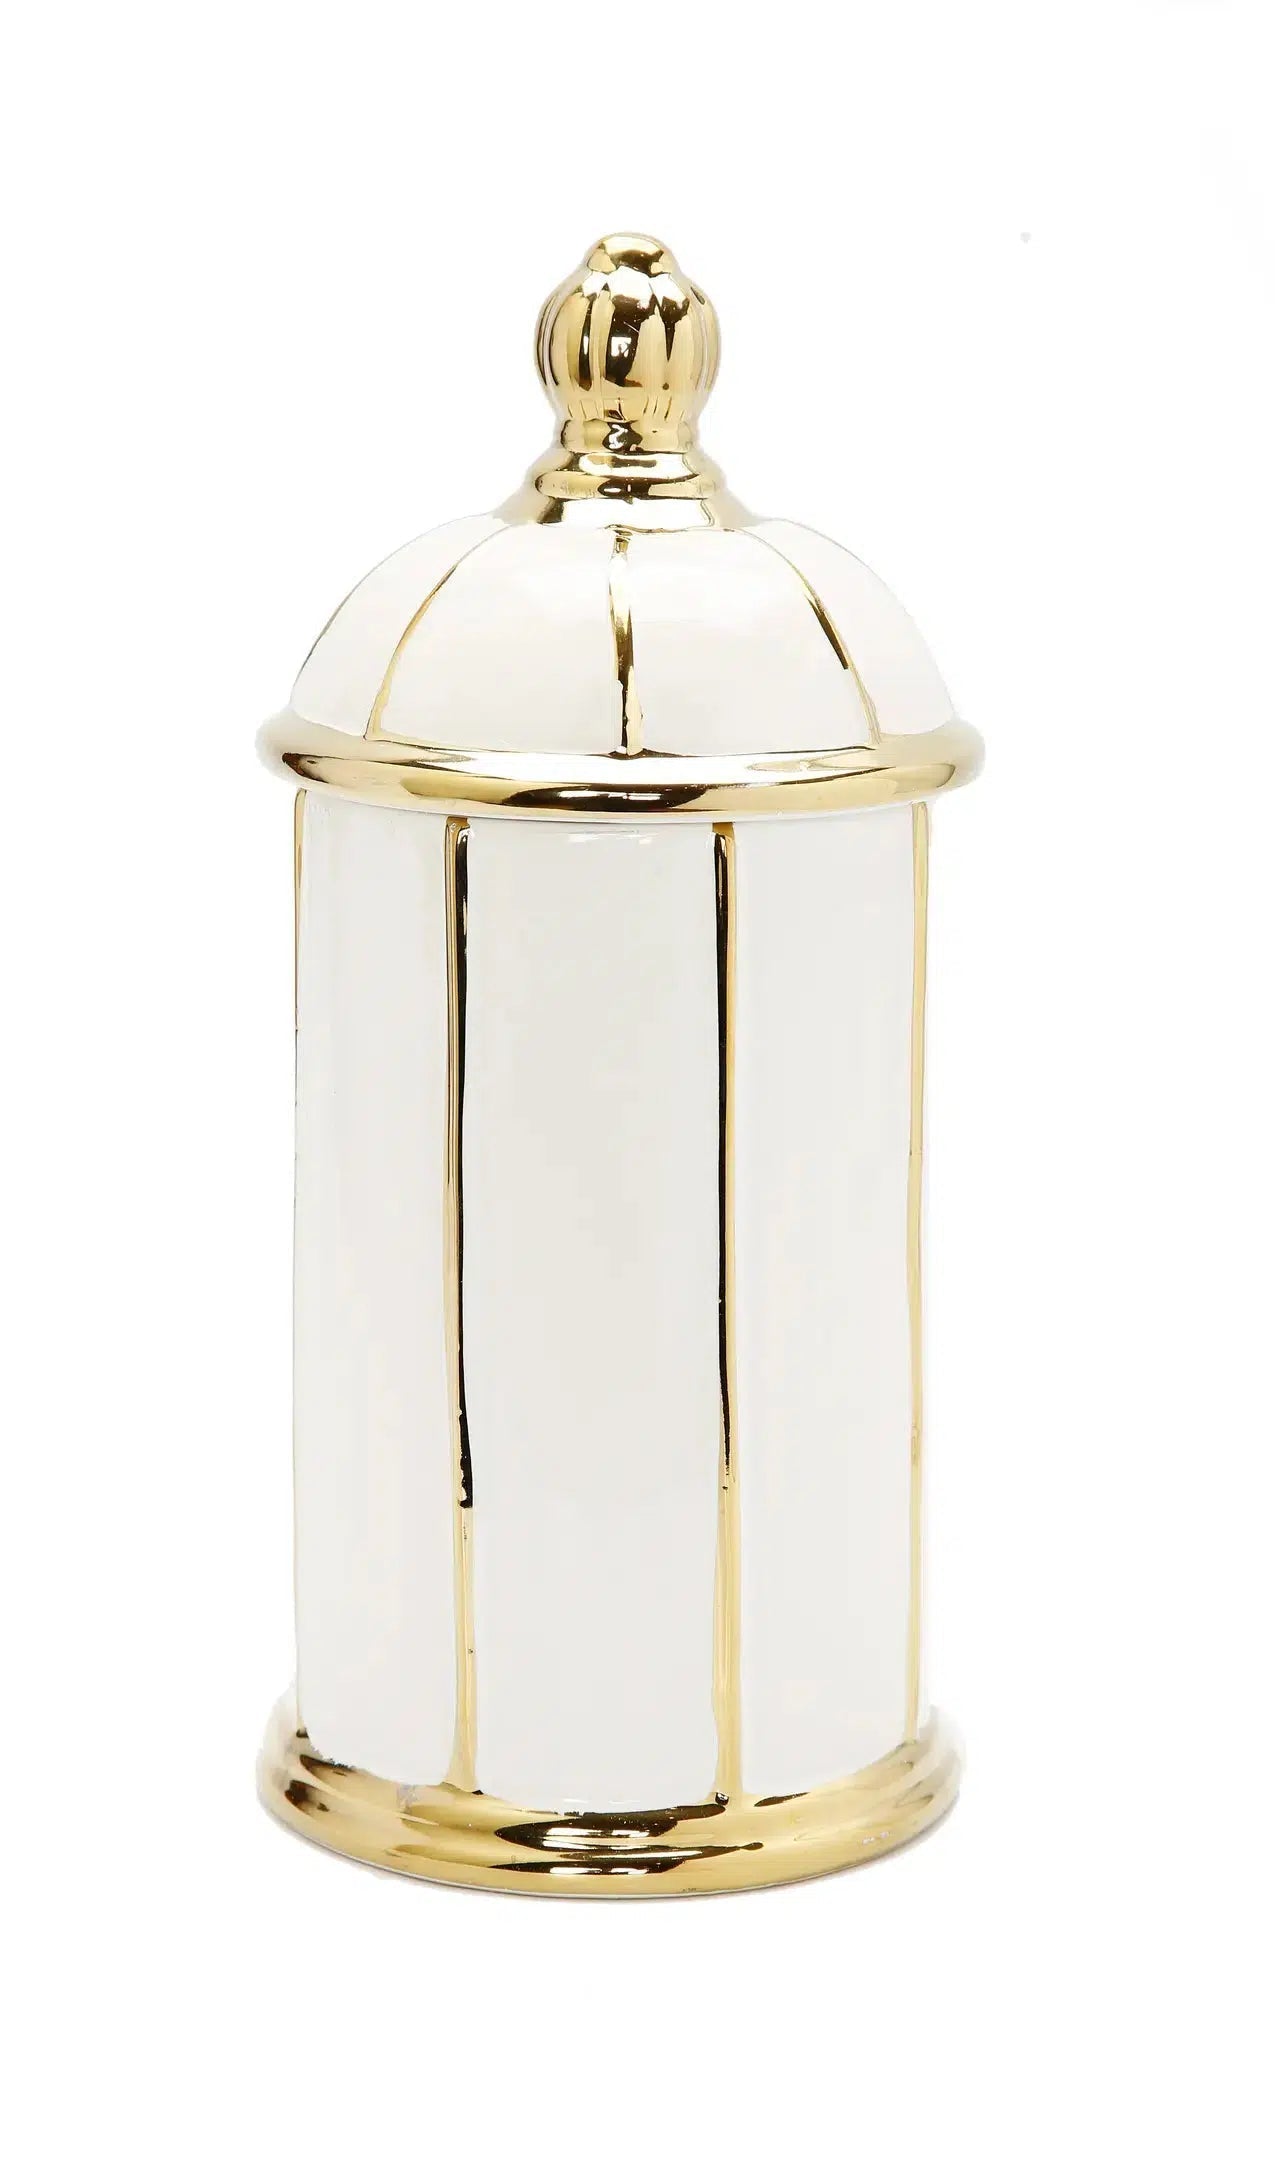 White Jar with Round Dome Cover Thin Gold Stripe Design Decorative Jars High Class Touch - Home Decor Large 